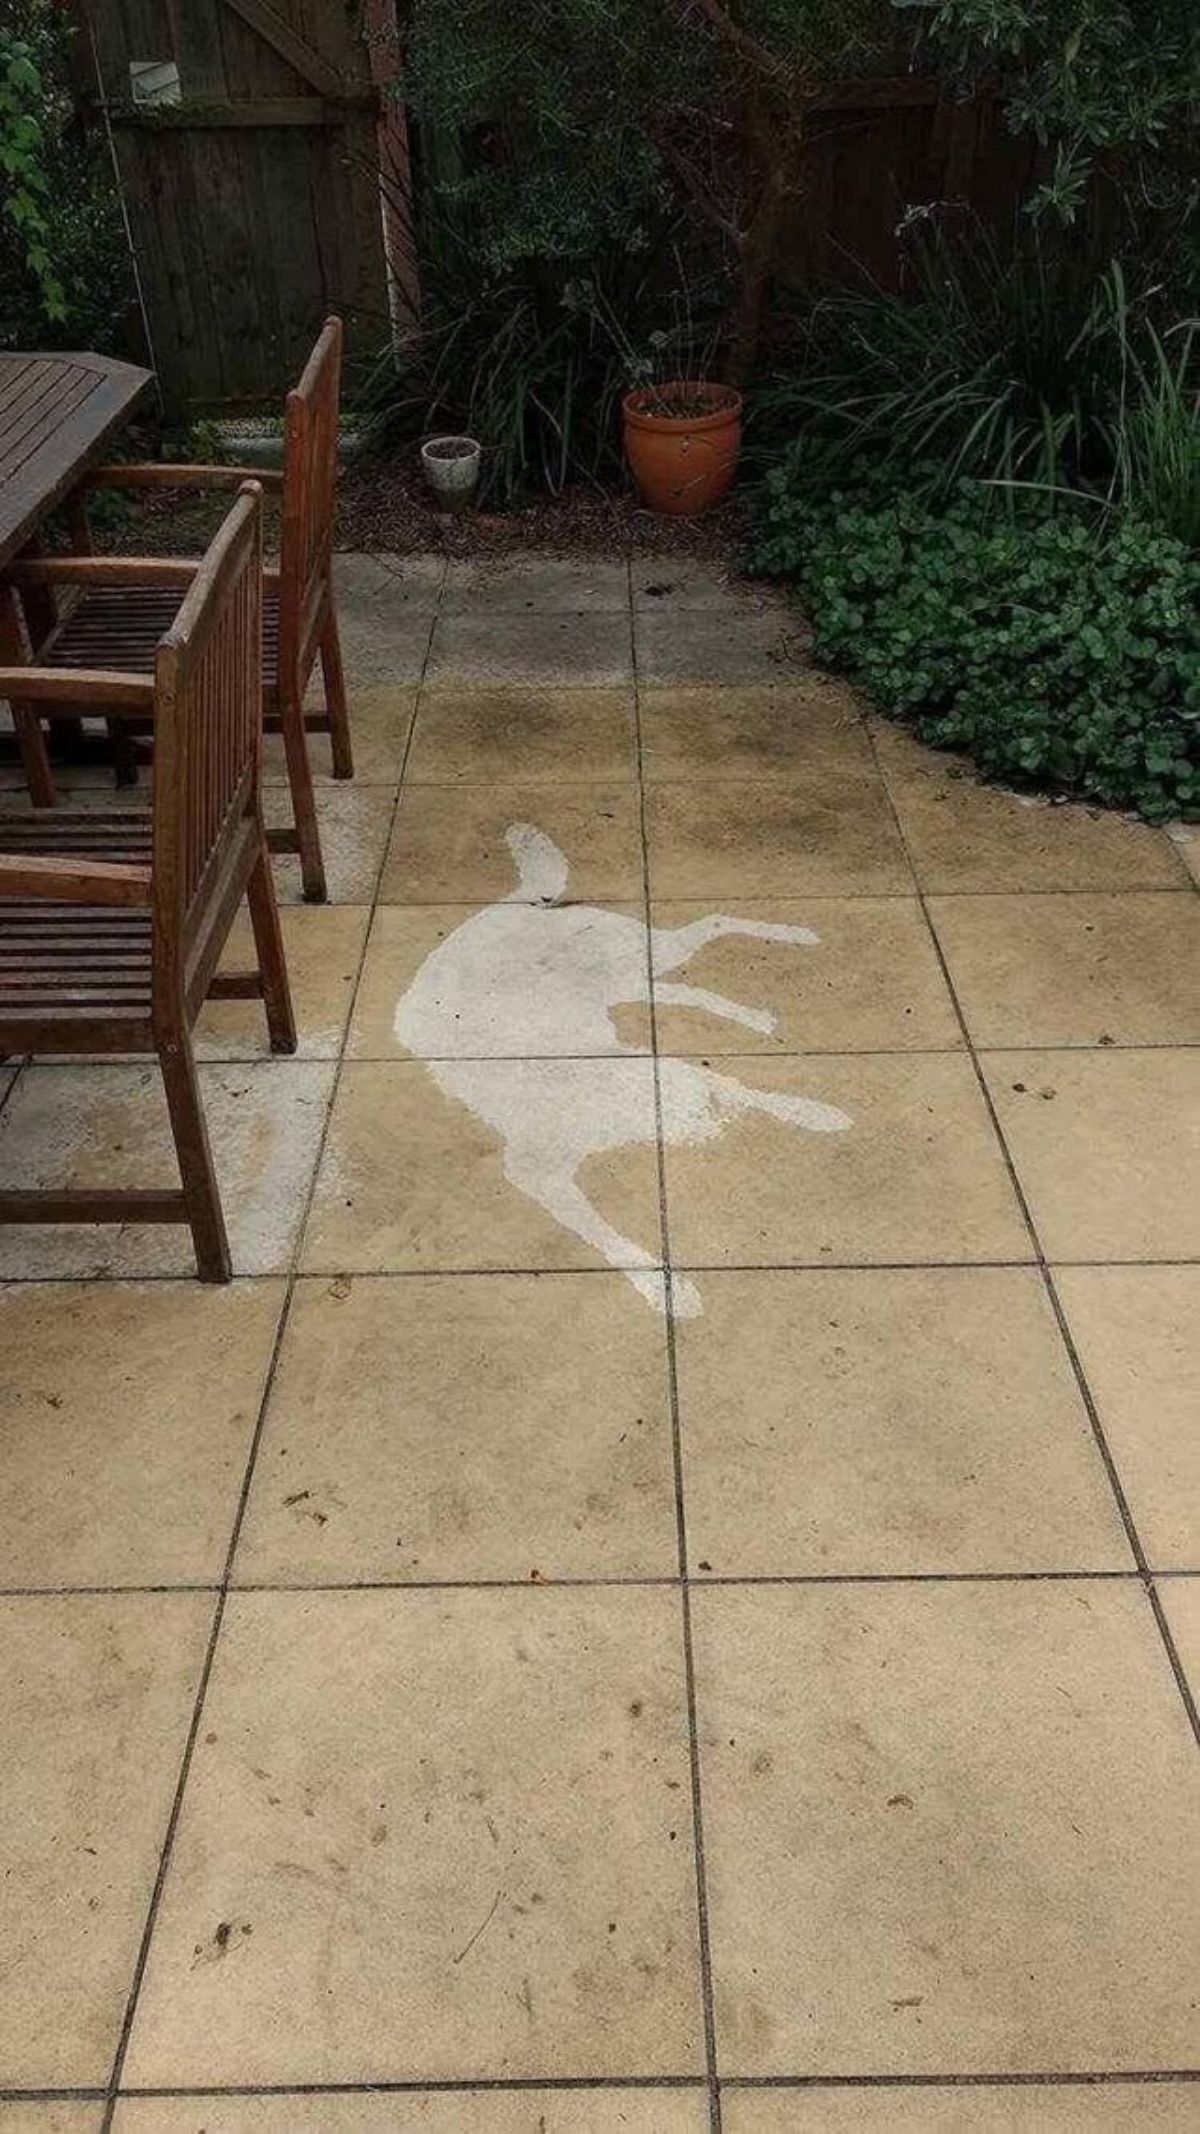 a rain-soaked outdoor area with a dry area in the shape of a dog laying on the floor